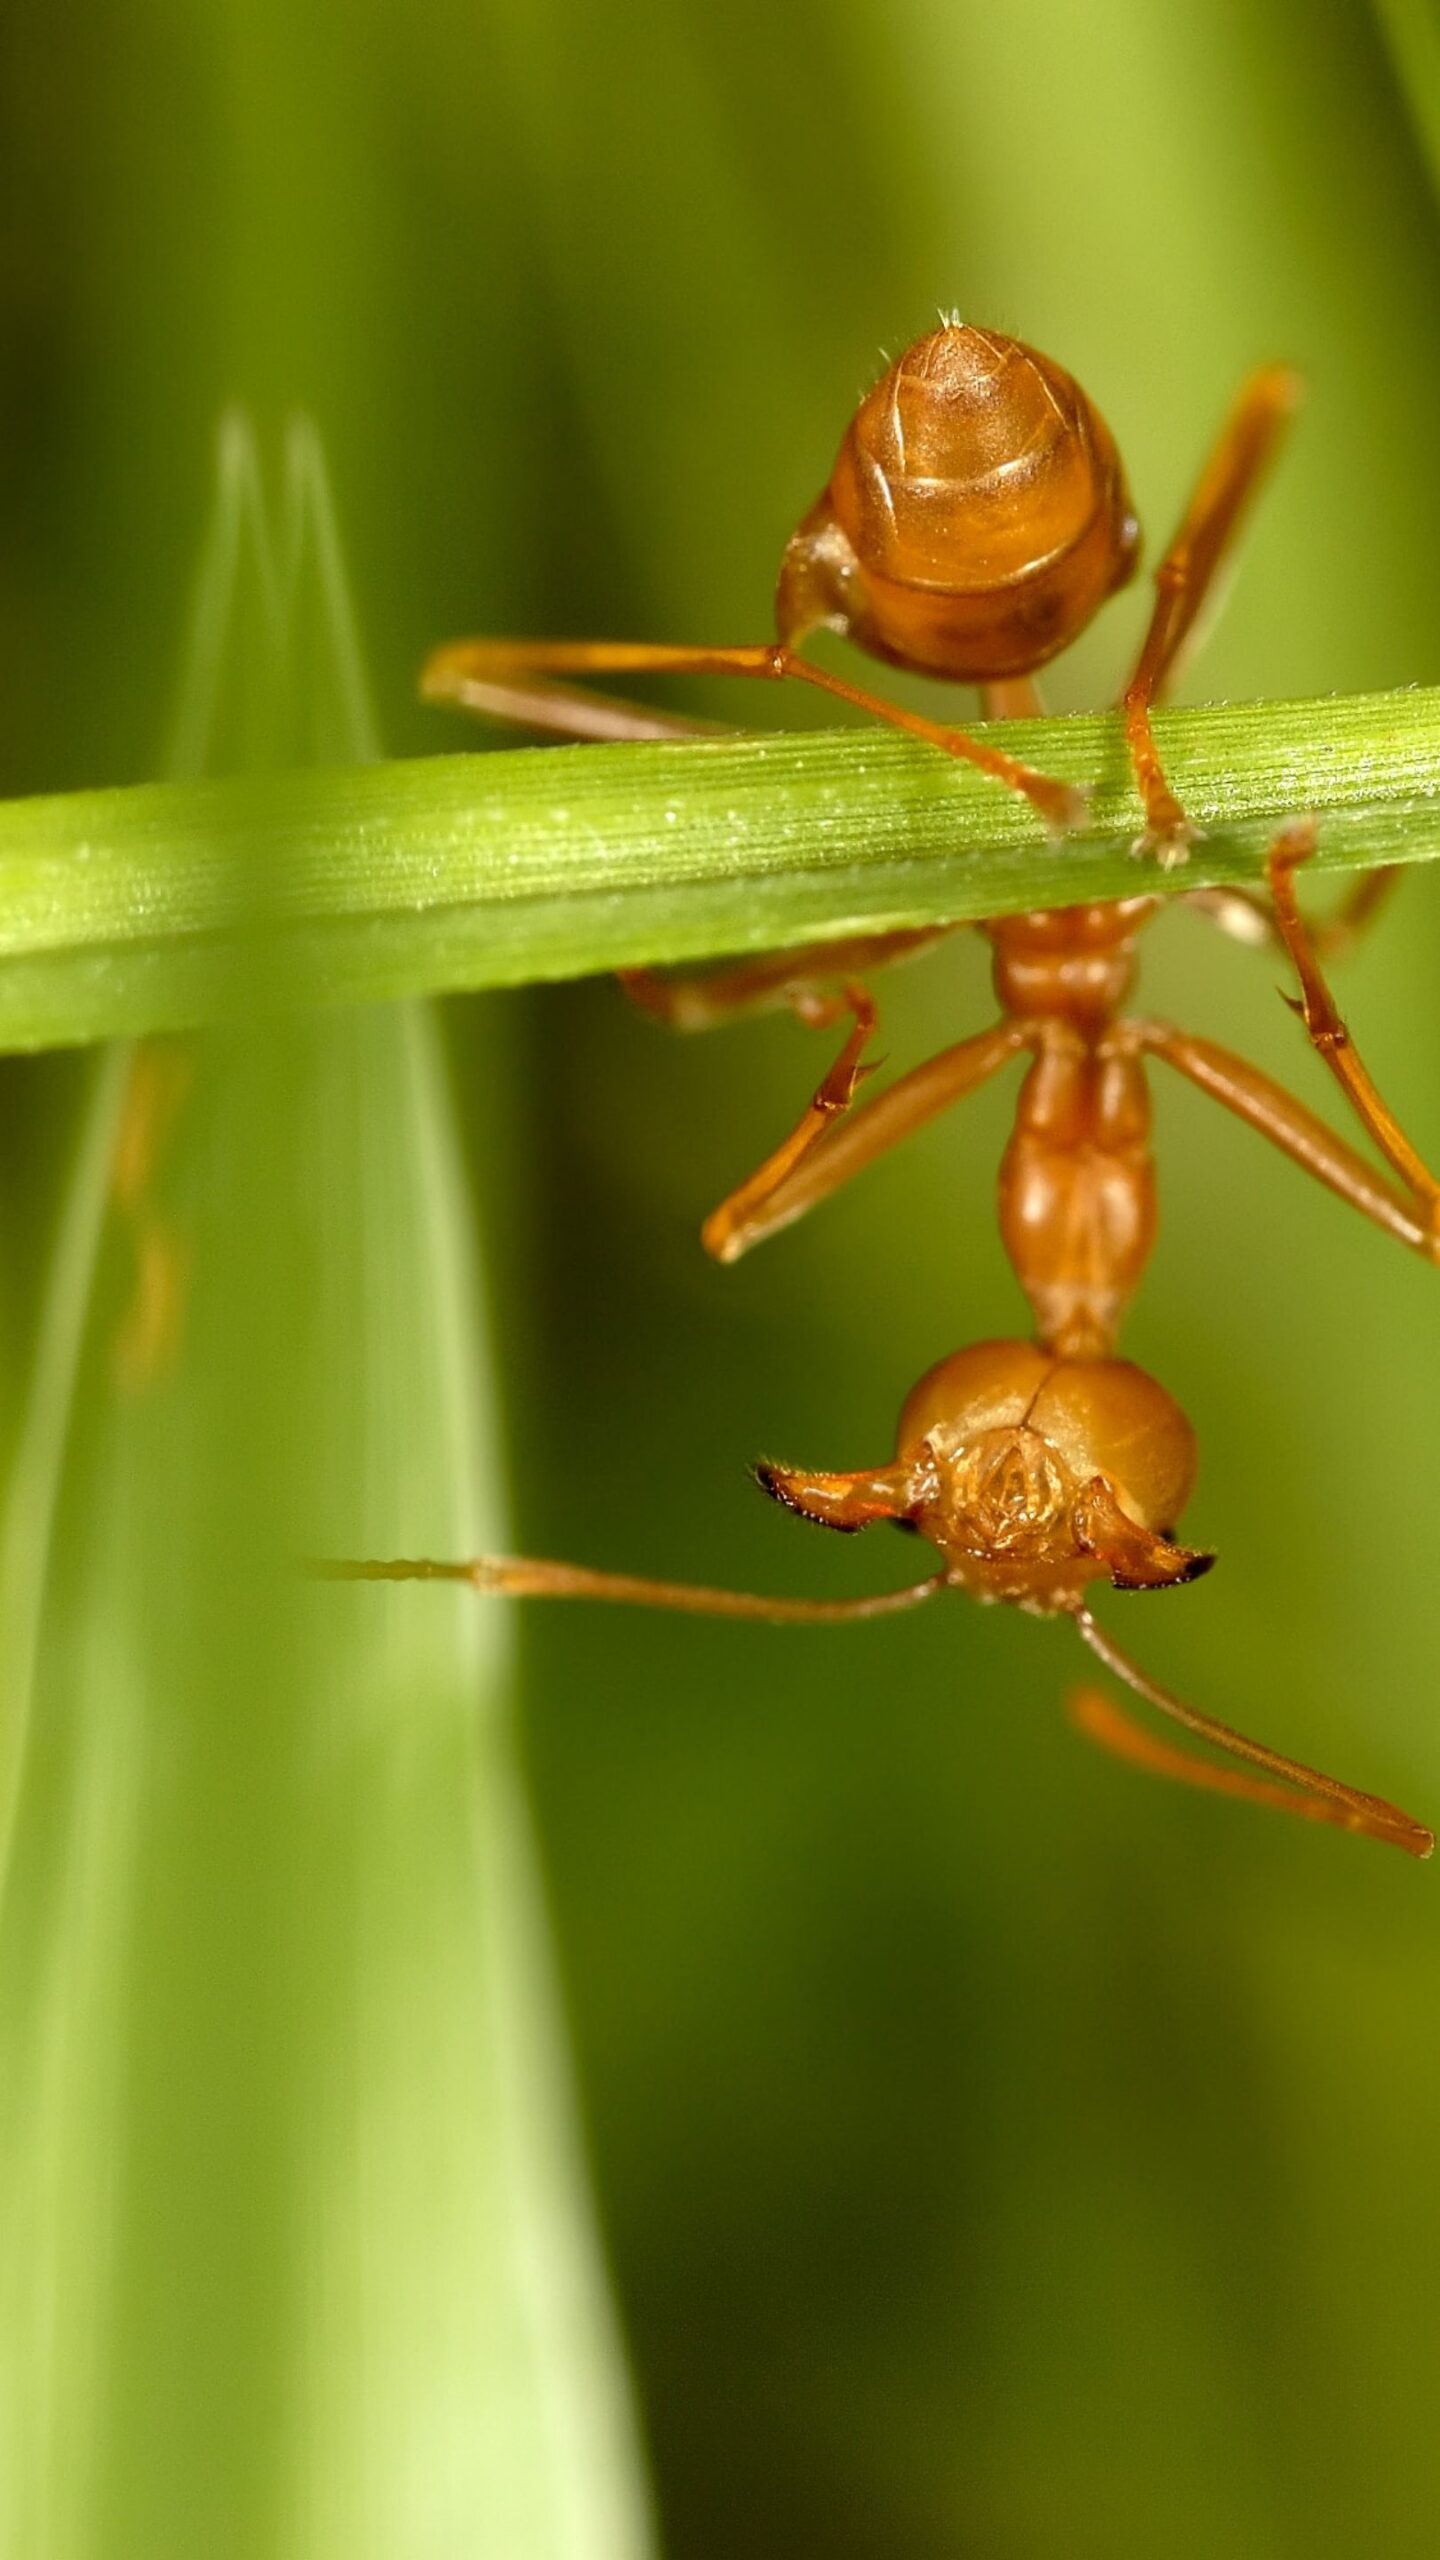 Red ant on grass, Upside-down view, Mobile wallpaper, Nature's beauty, 1440x2560 HD Handy